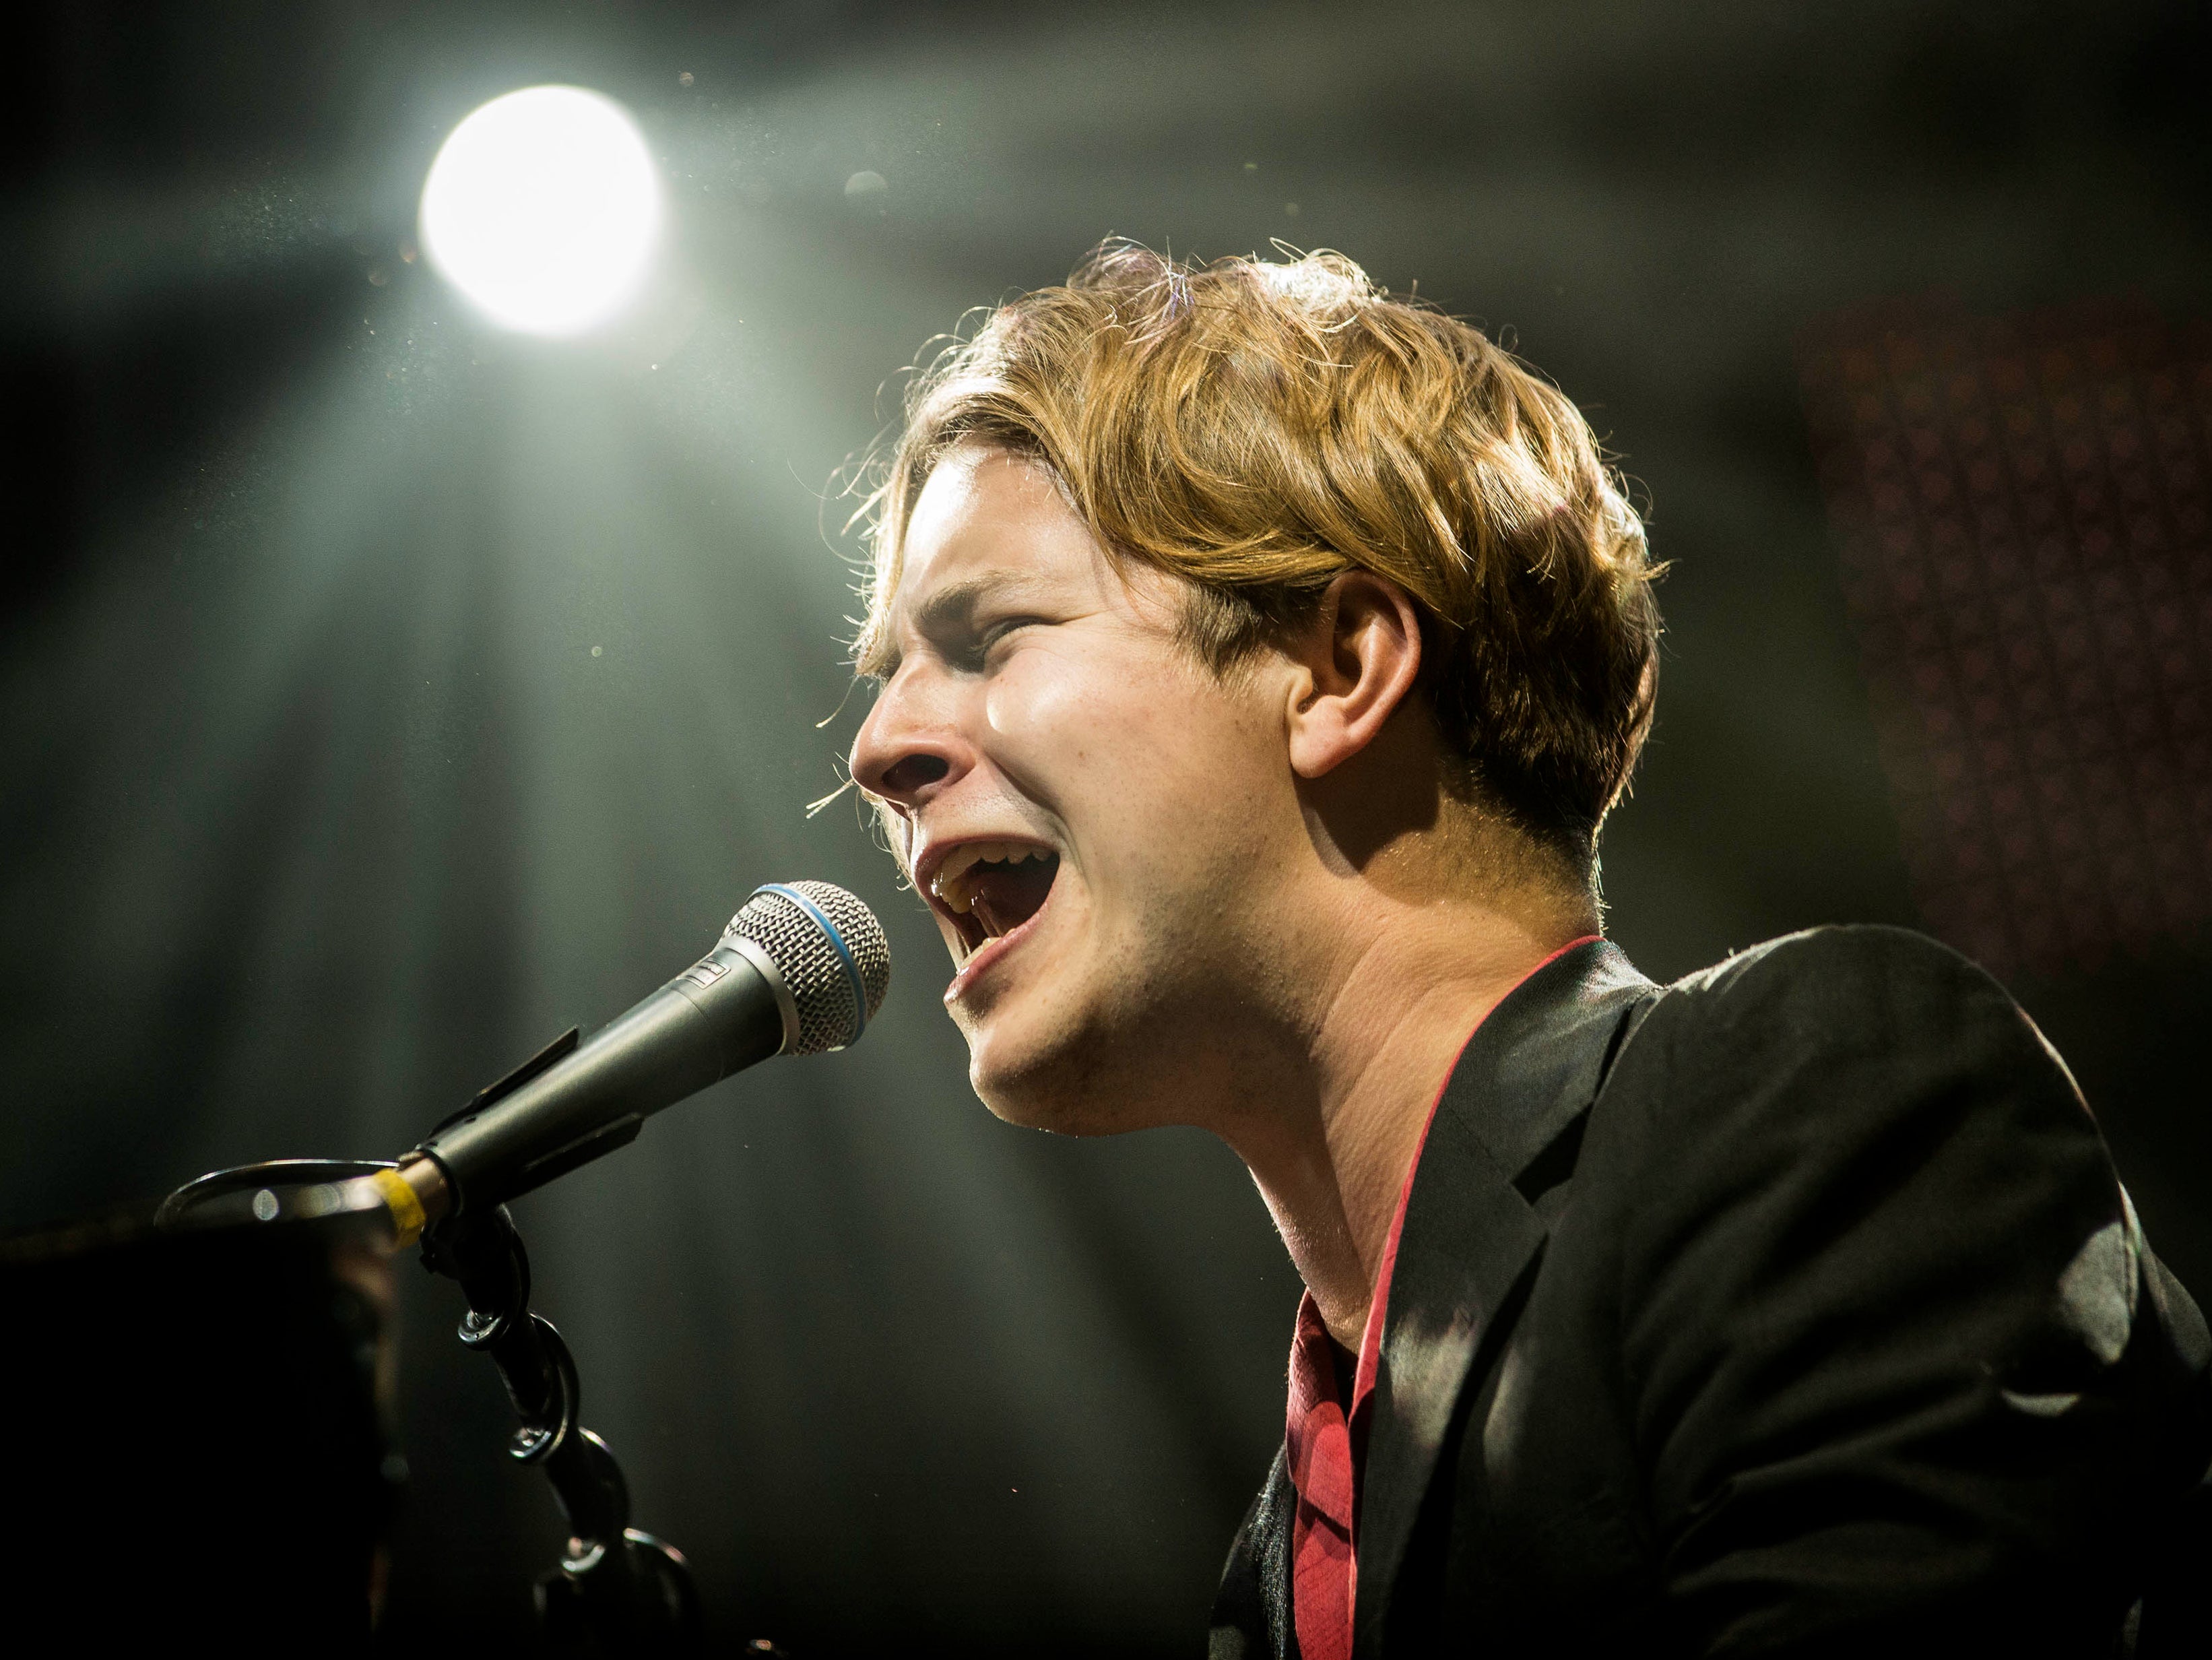 We stand together': Tom Odell reacts to 'Another Love' becoming viral  protest song